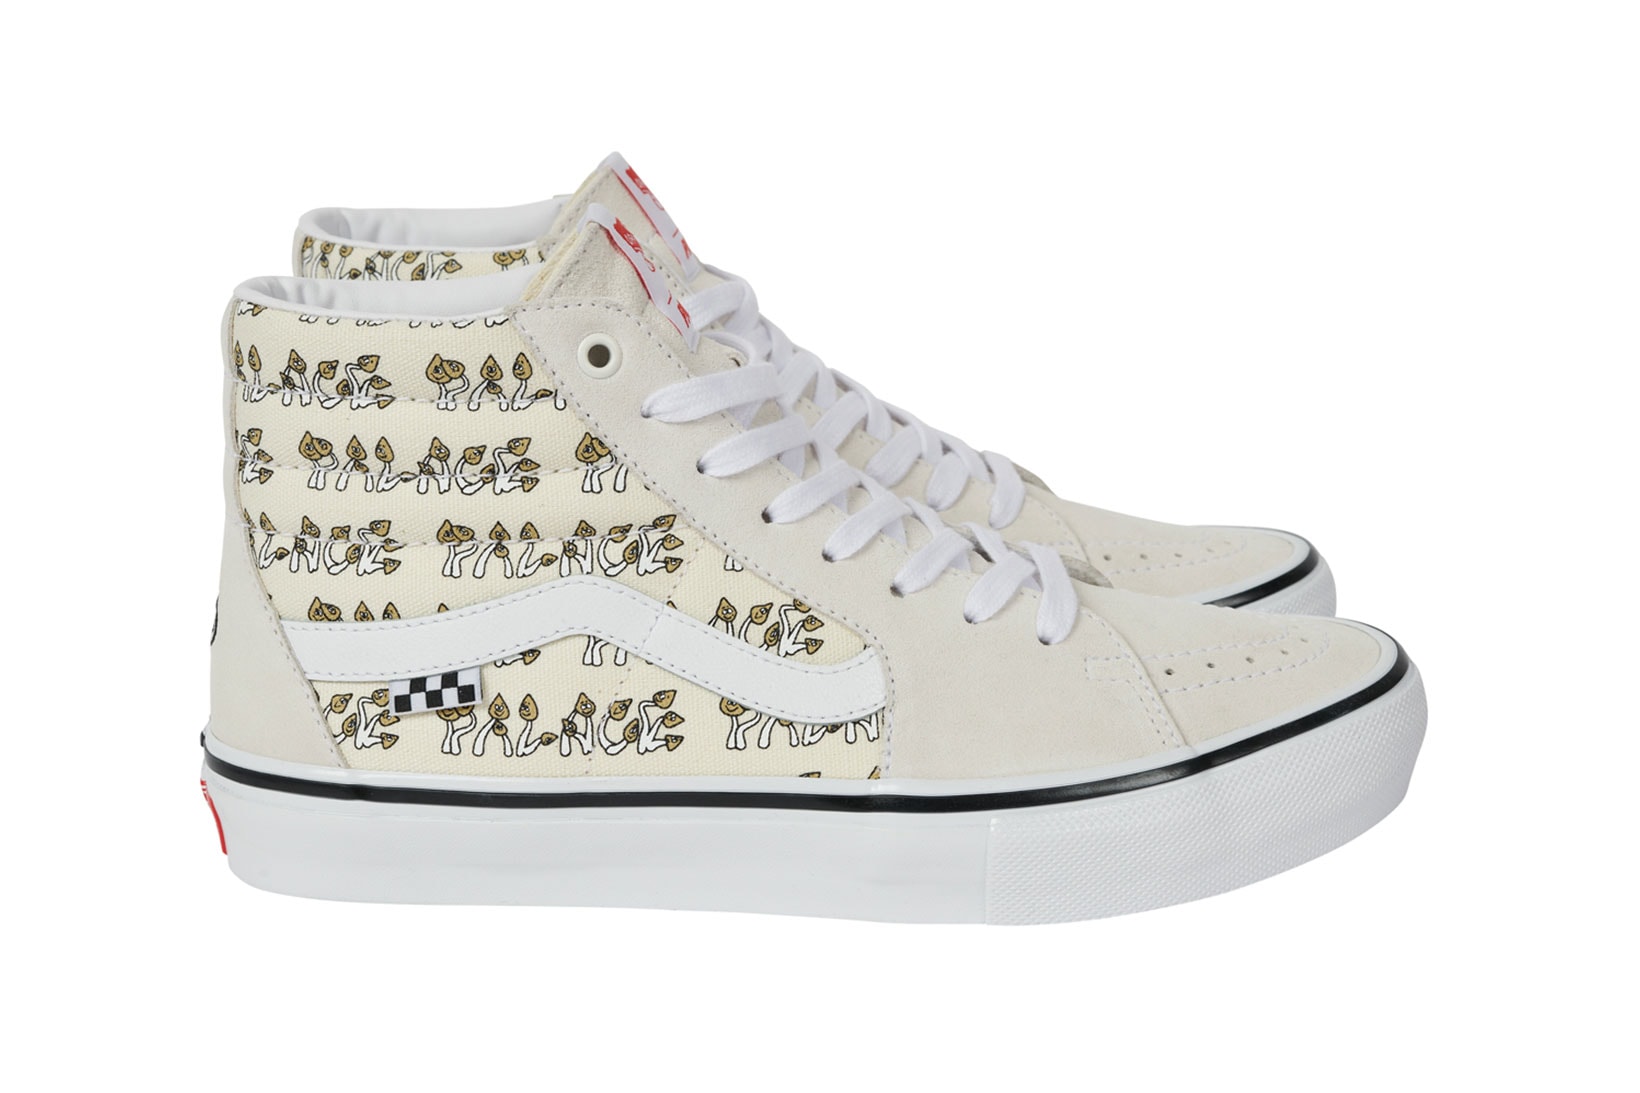 Palace Vans Sk8-Hi Shroom Collection Sneakers White Ivory Sides